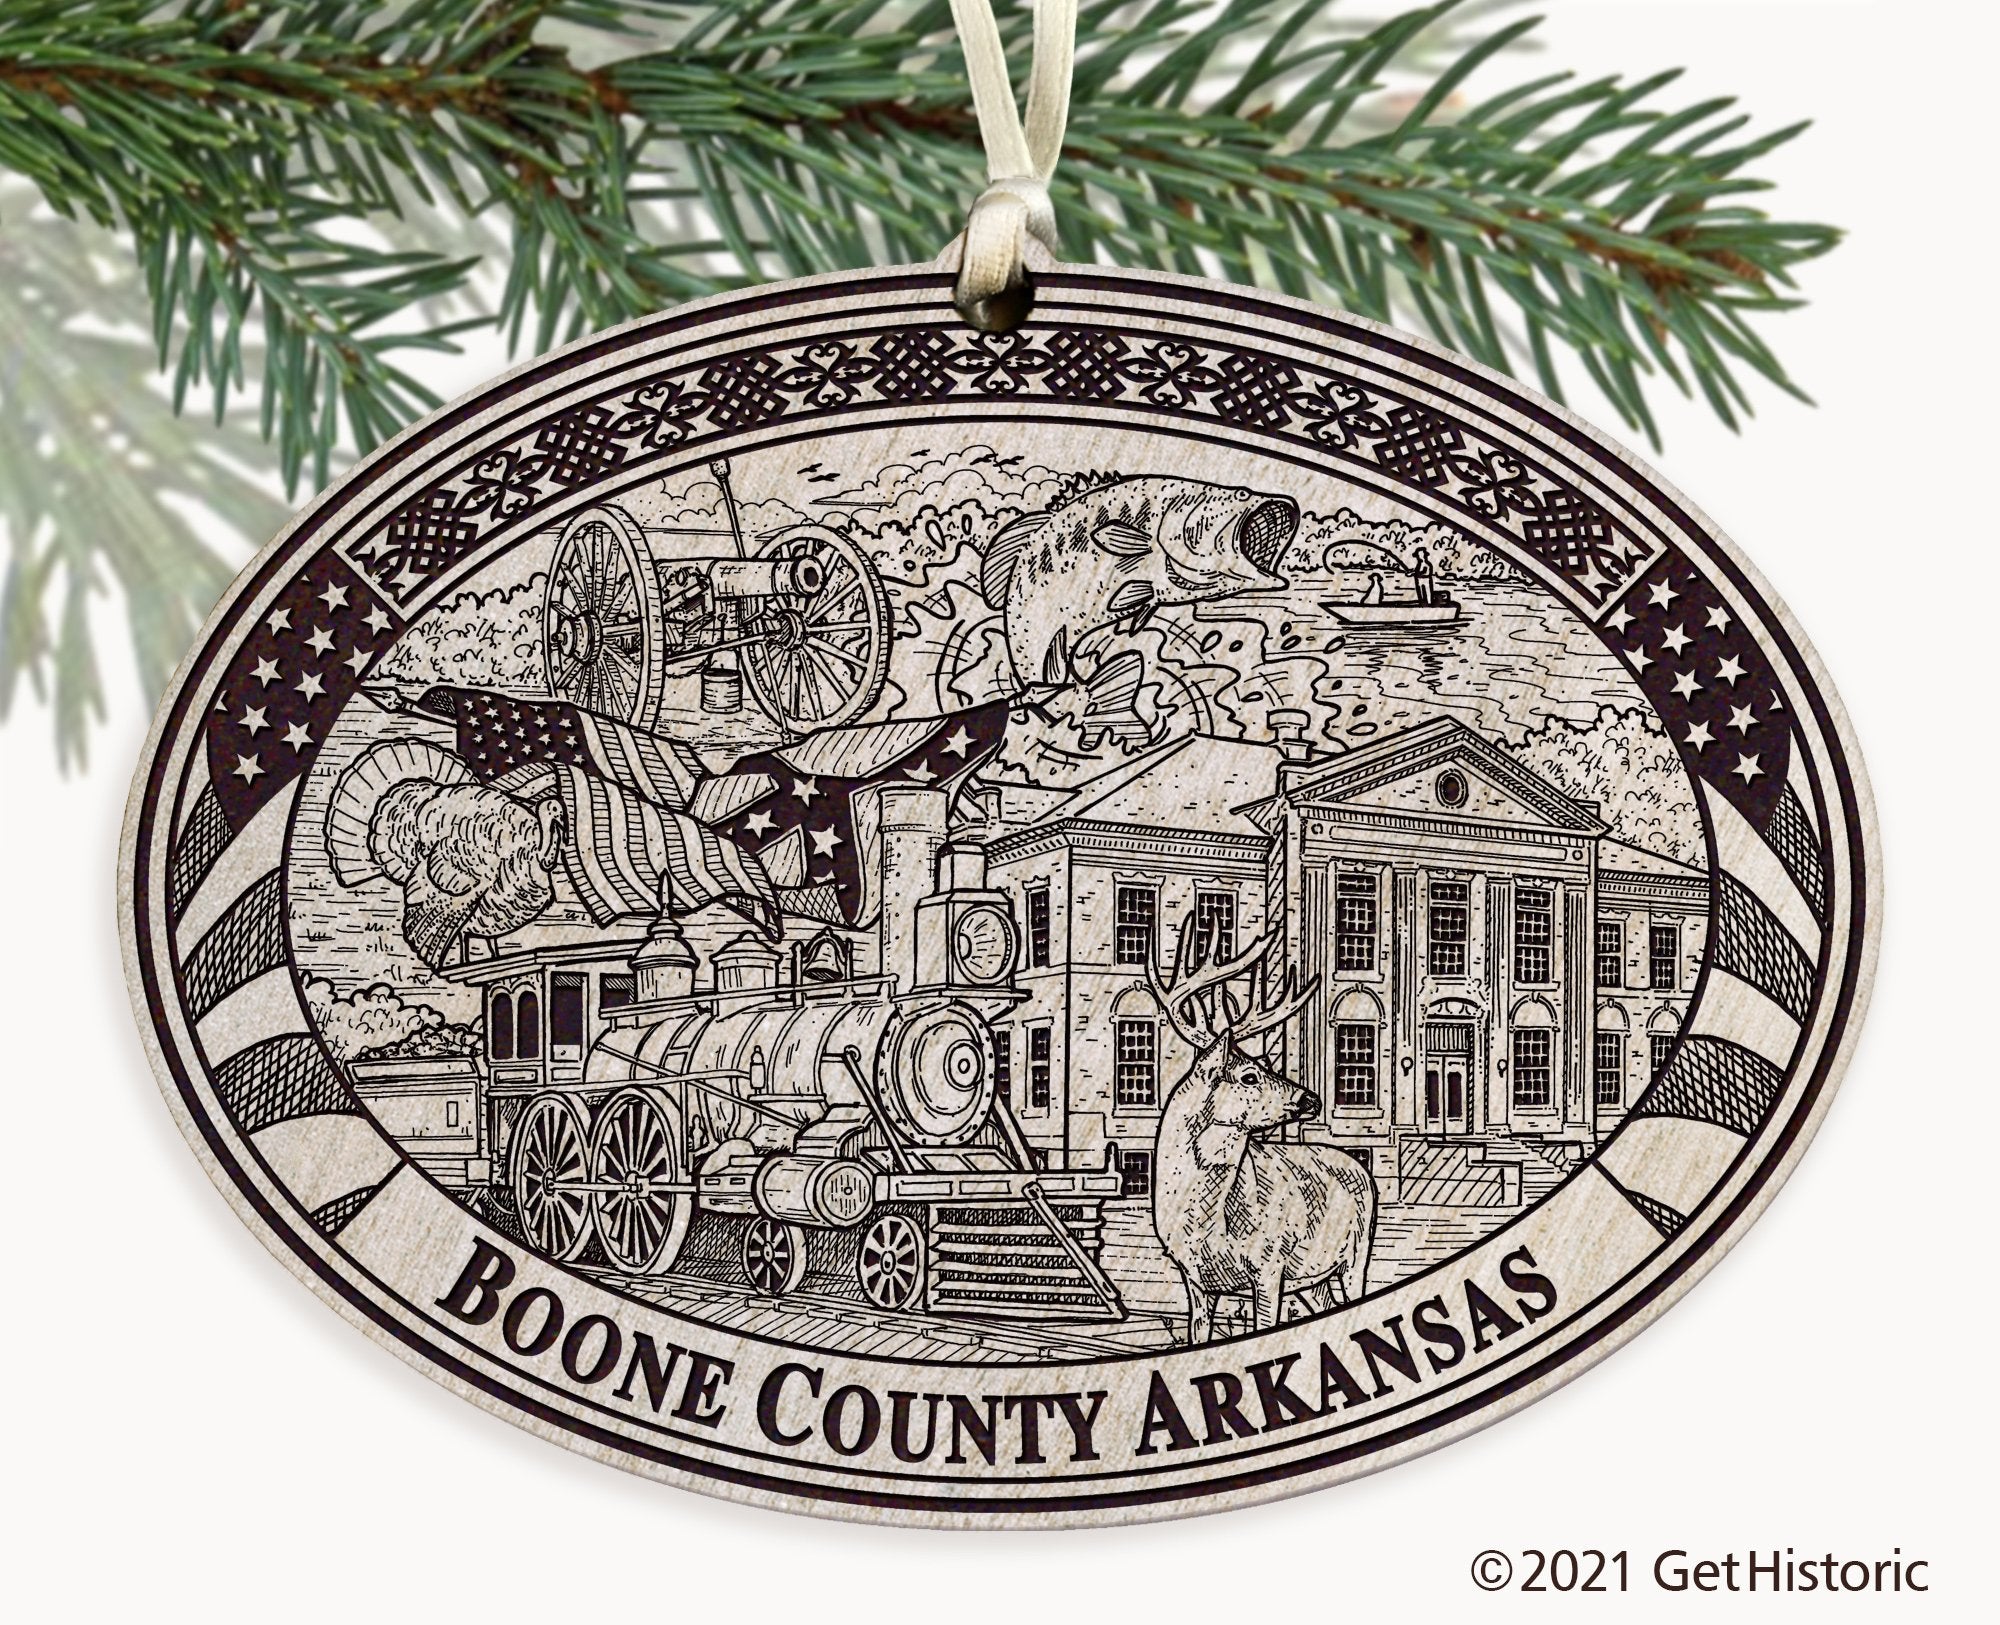 Boone County Arkansas Engraved Ornament